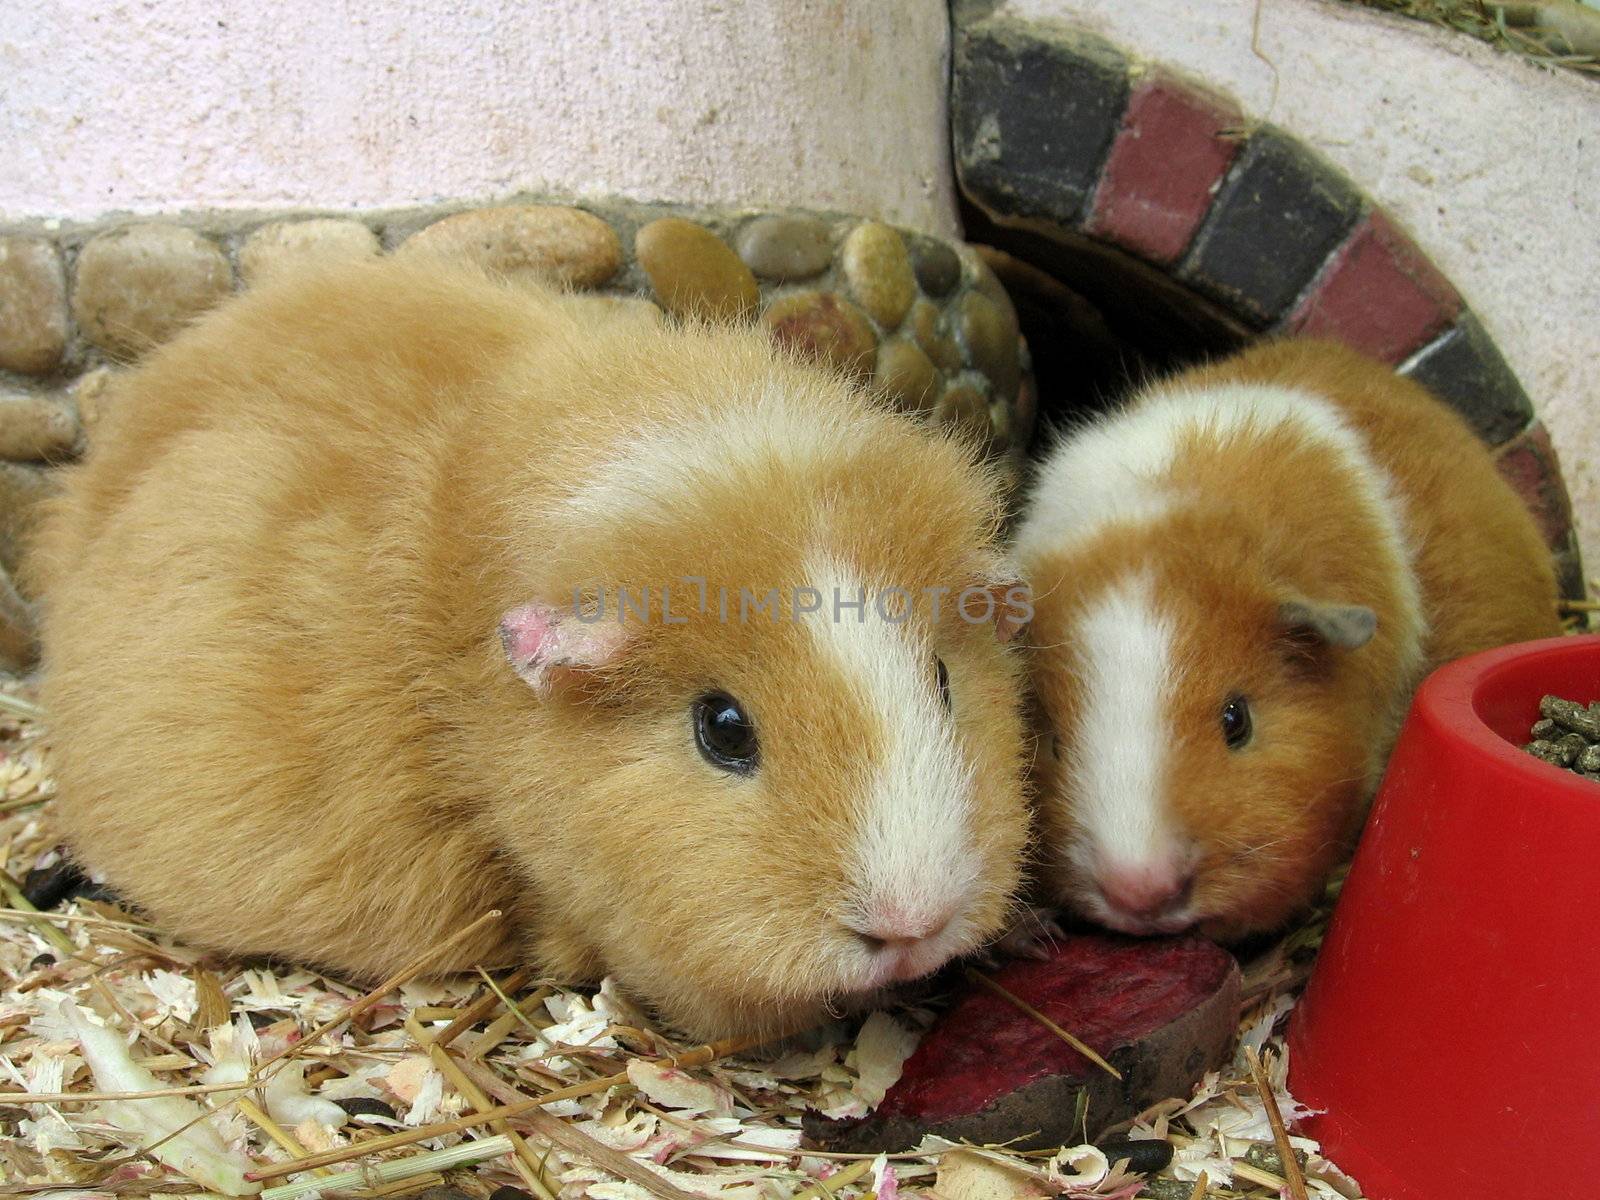 Two orange guinea pigs on the sawdust